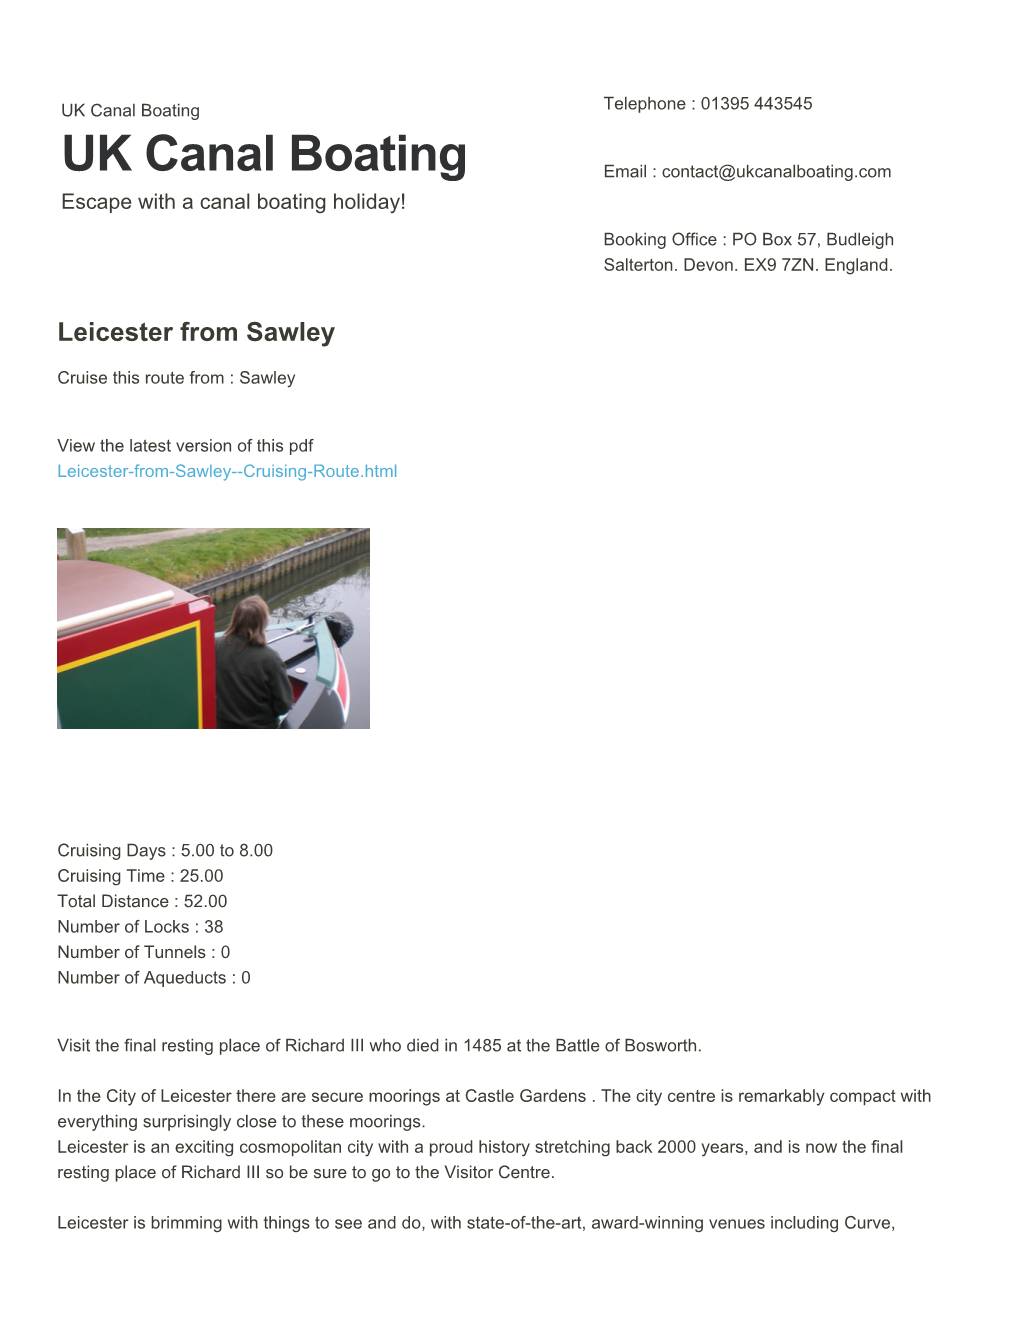 Leicester from Sawley | UK Canal Boating